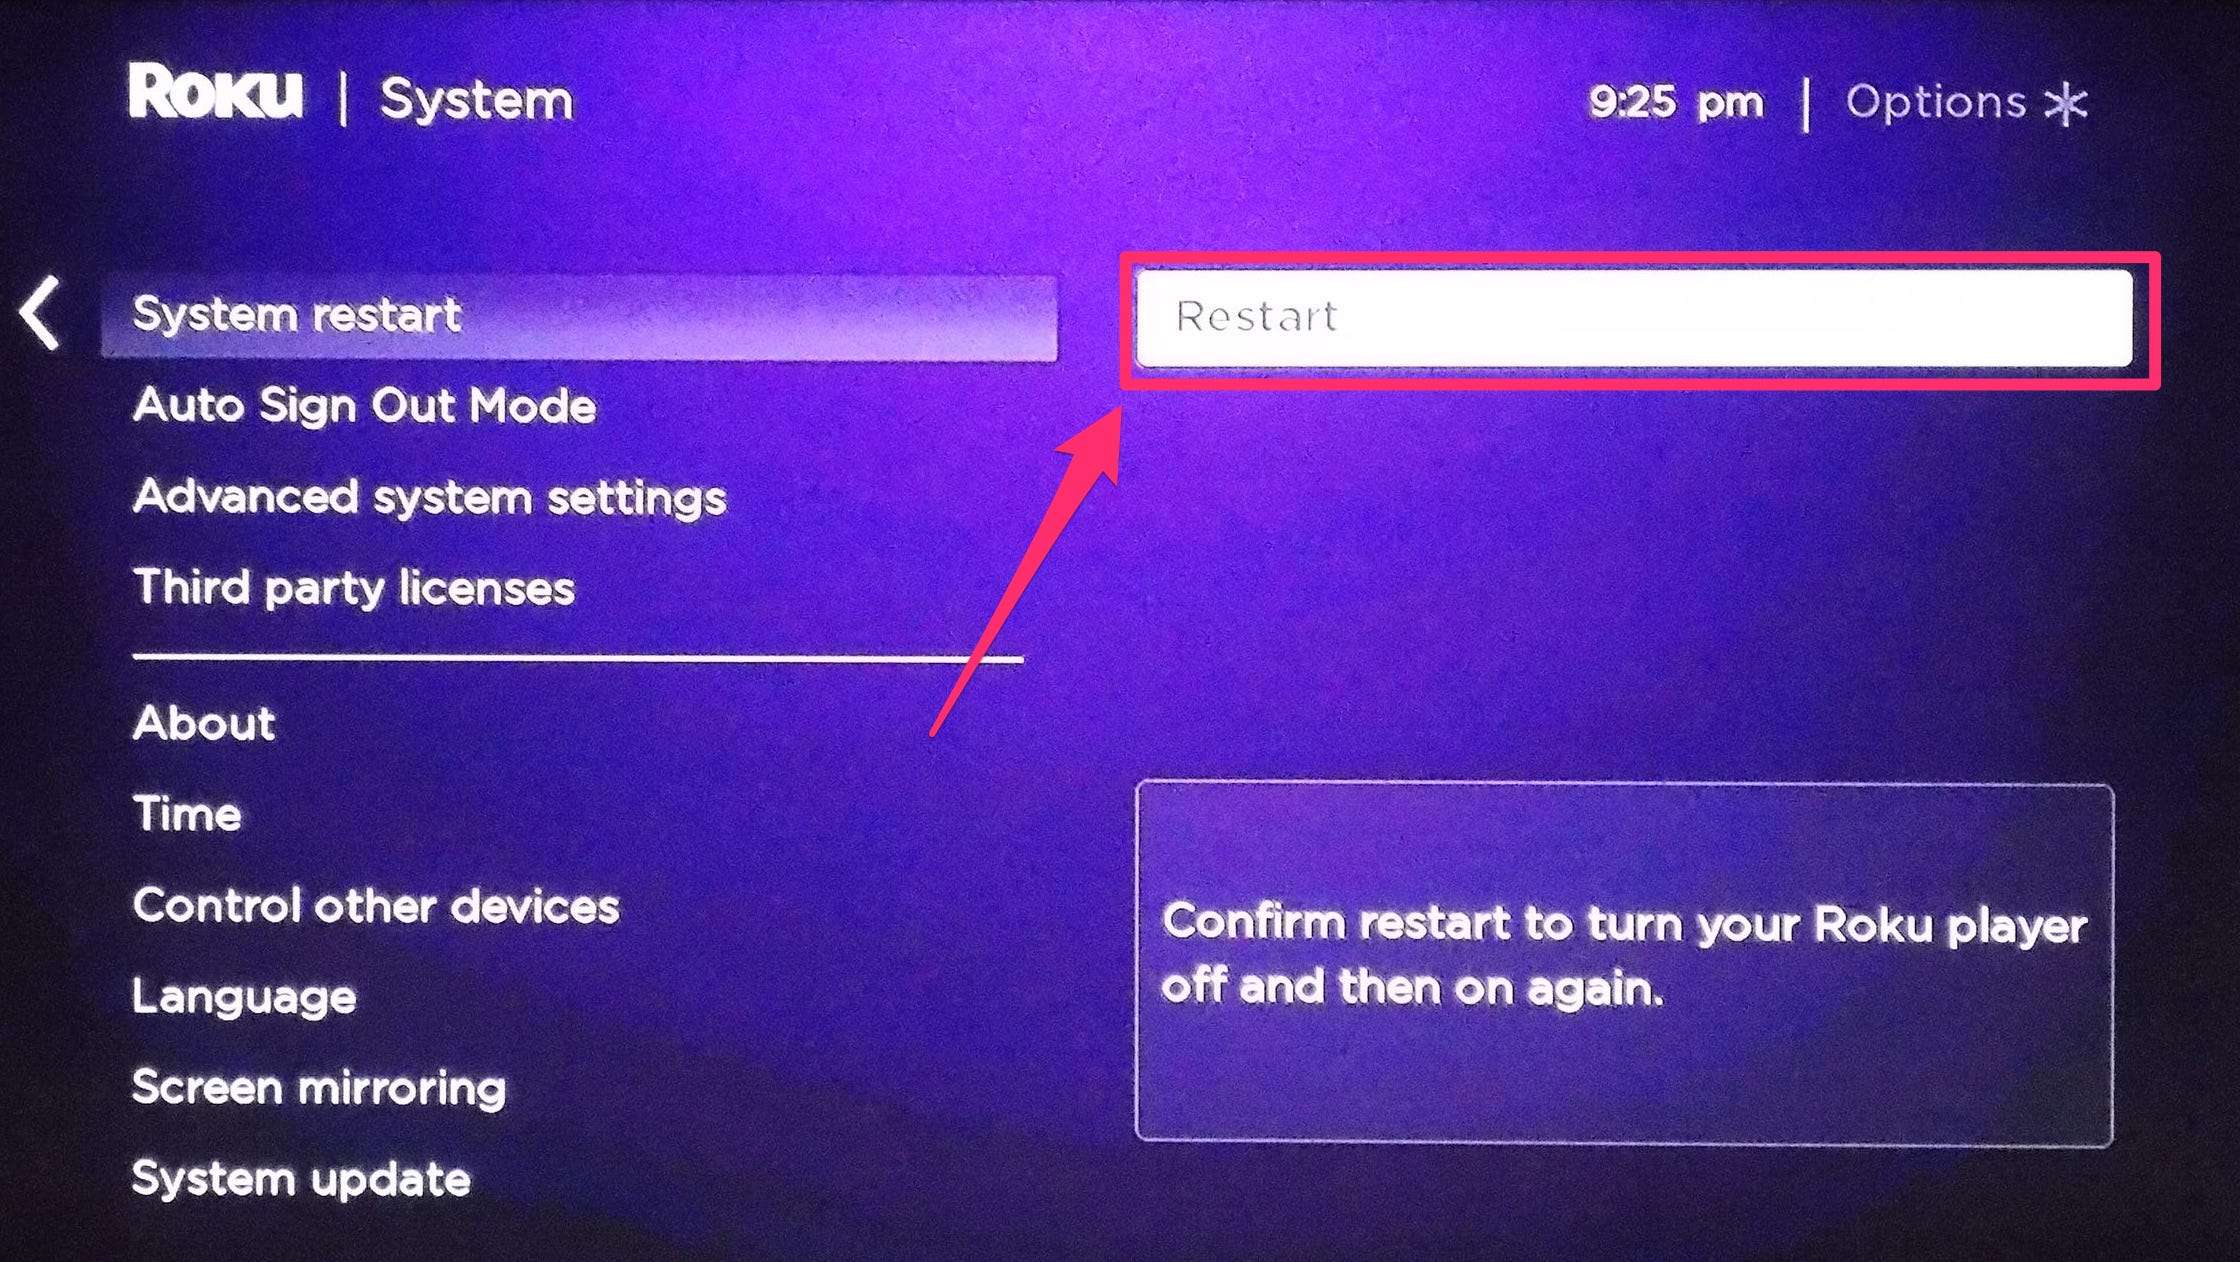 Reset your Roku device: If the freezing and restarting issues persist, perform a factory reset on your Roku device. This will erase all settings and data, so make sure to back up any important information beforehand. Go to the Settings menu, select "System," then "Advanced system settings," and finally choose "Factory reset."
Contact Roku support: If none of the above steps resolve the freezing and restarting problems, reach out to Roku's customer support for further assistance. They will be abl